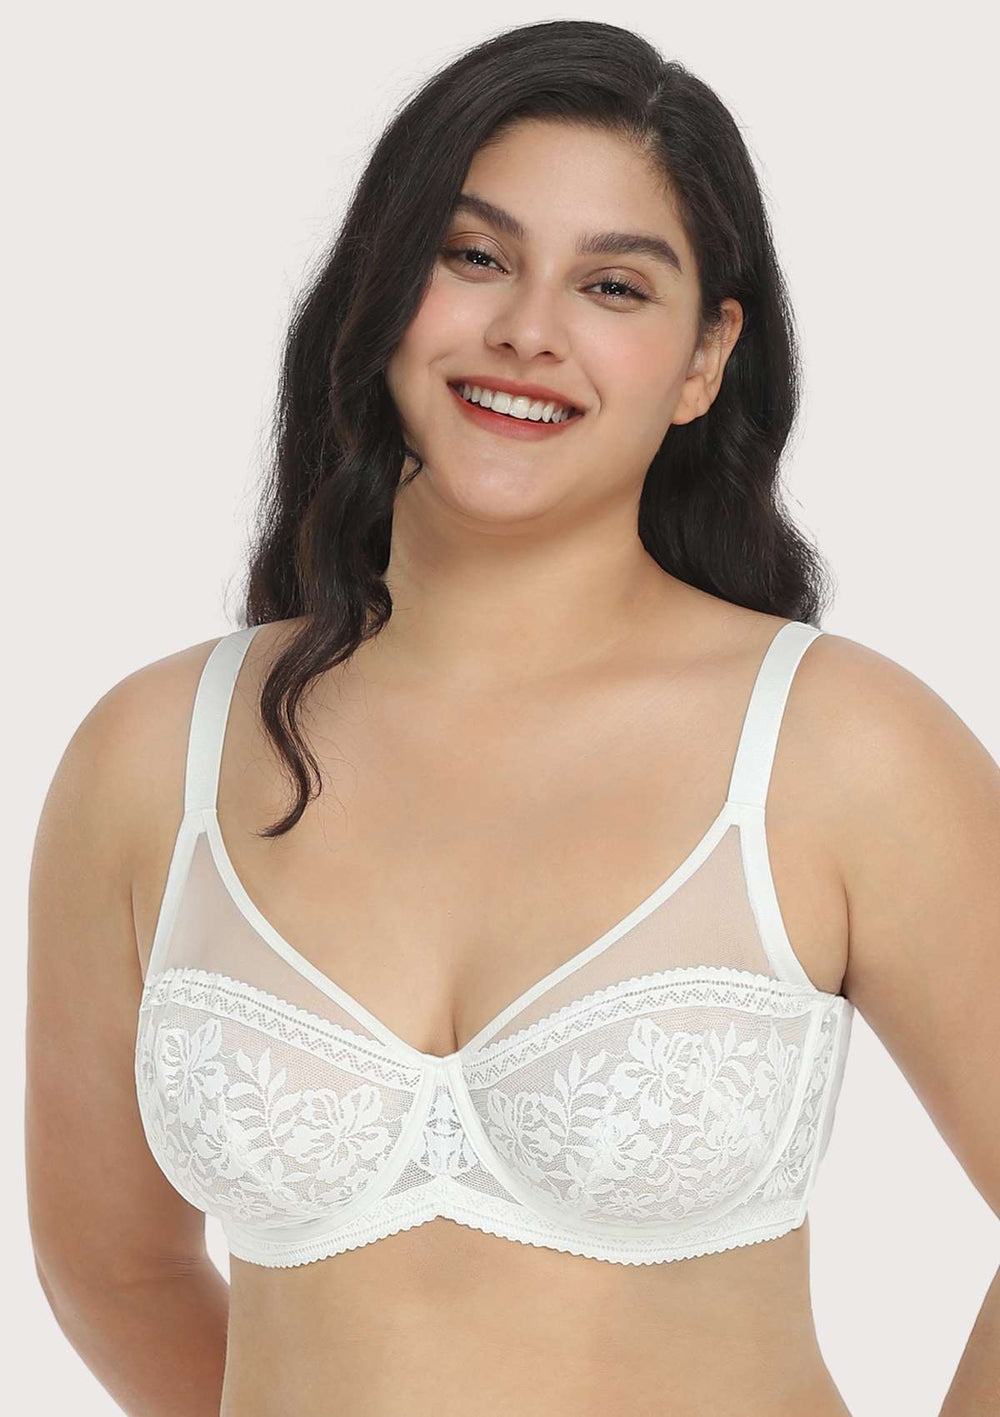  Womens Plus Size Bras Full Coverage Lace Underwire Unlined  Bra White 32G